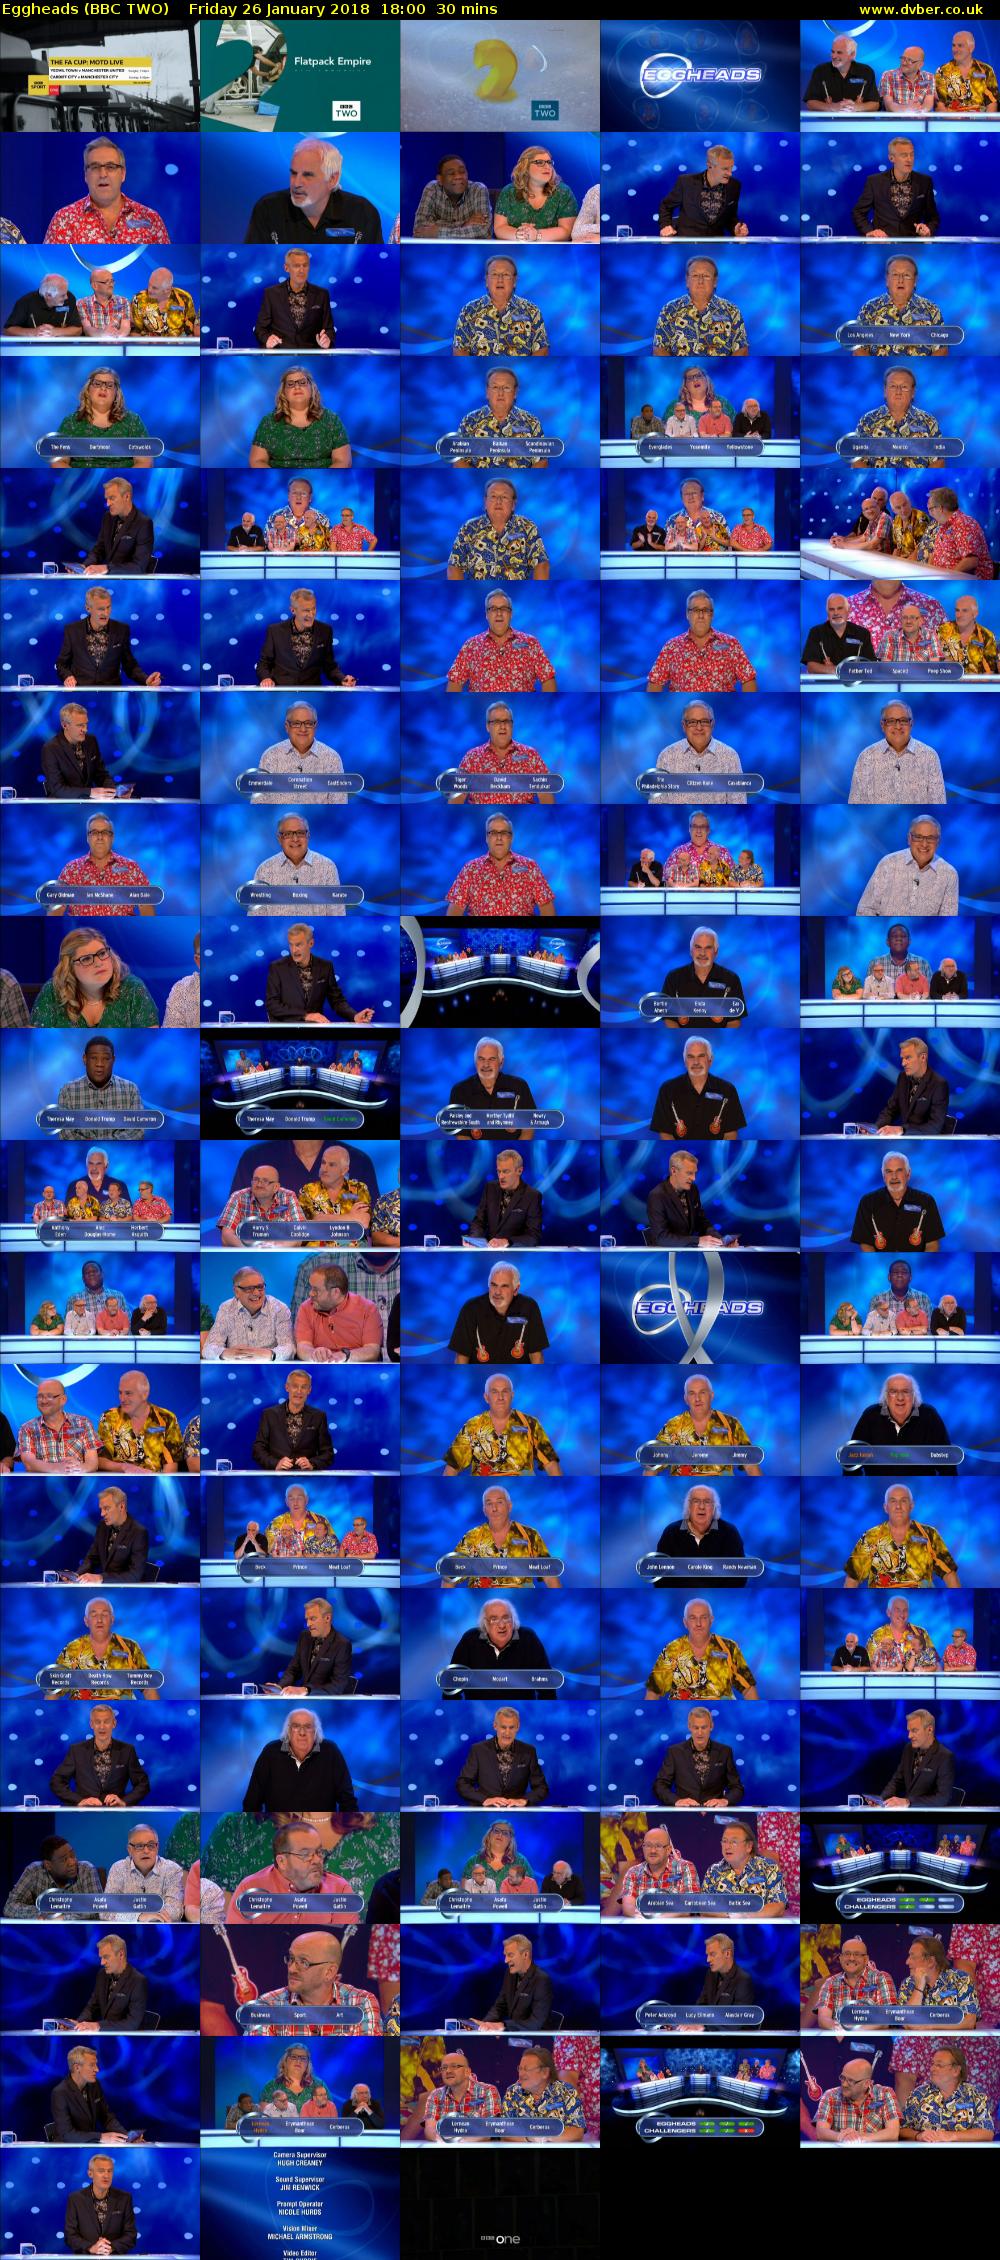 Eggheads (BBC TWO) Friday 26 January 2018 18:00 - 18:30